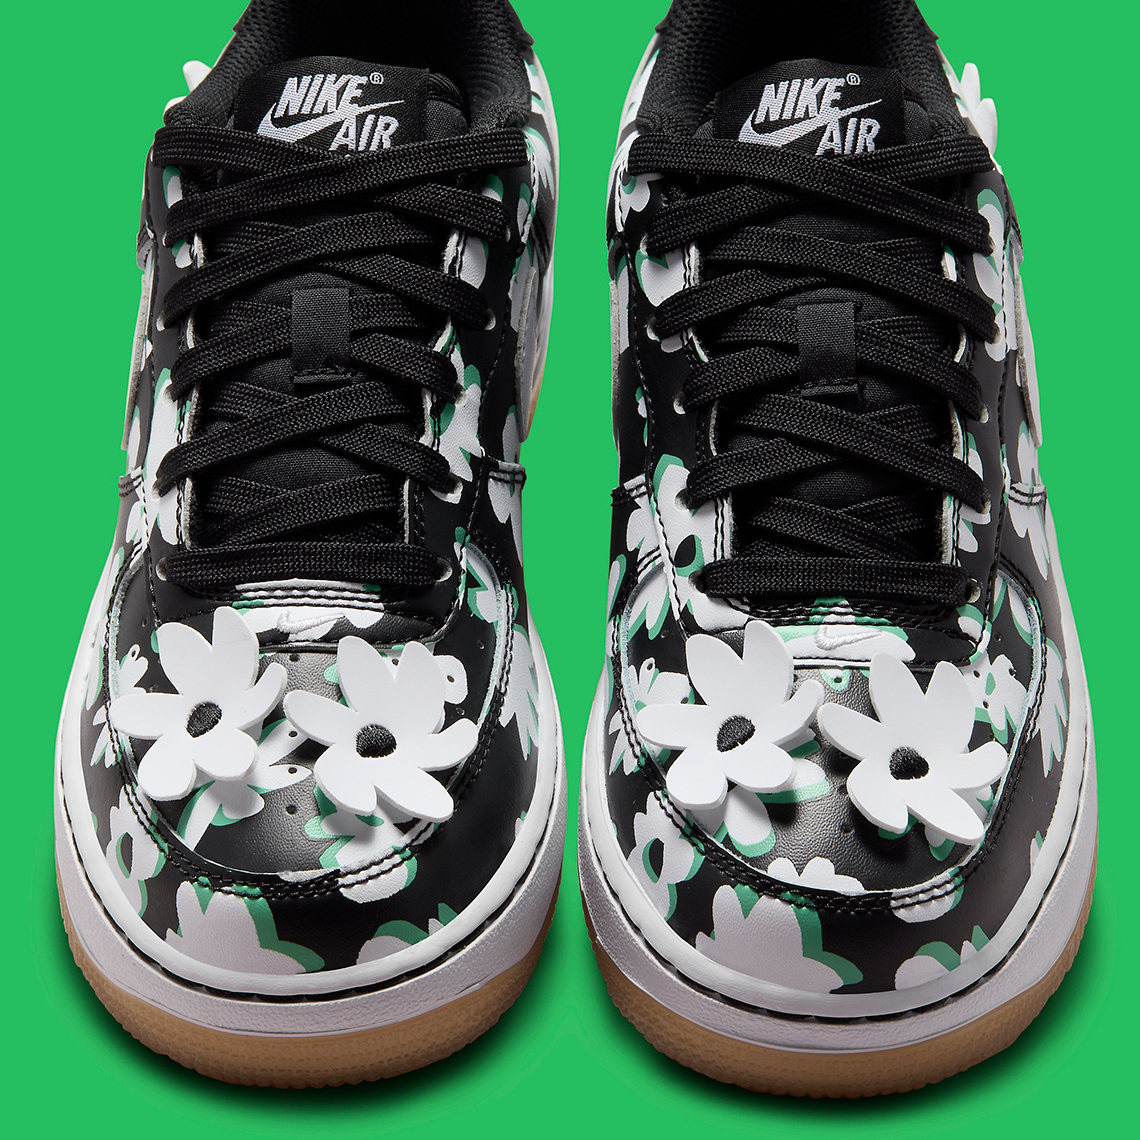 Nike Air Force 1 Low Gs Black White Flowers Dz2663 001 2